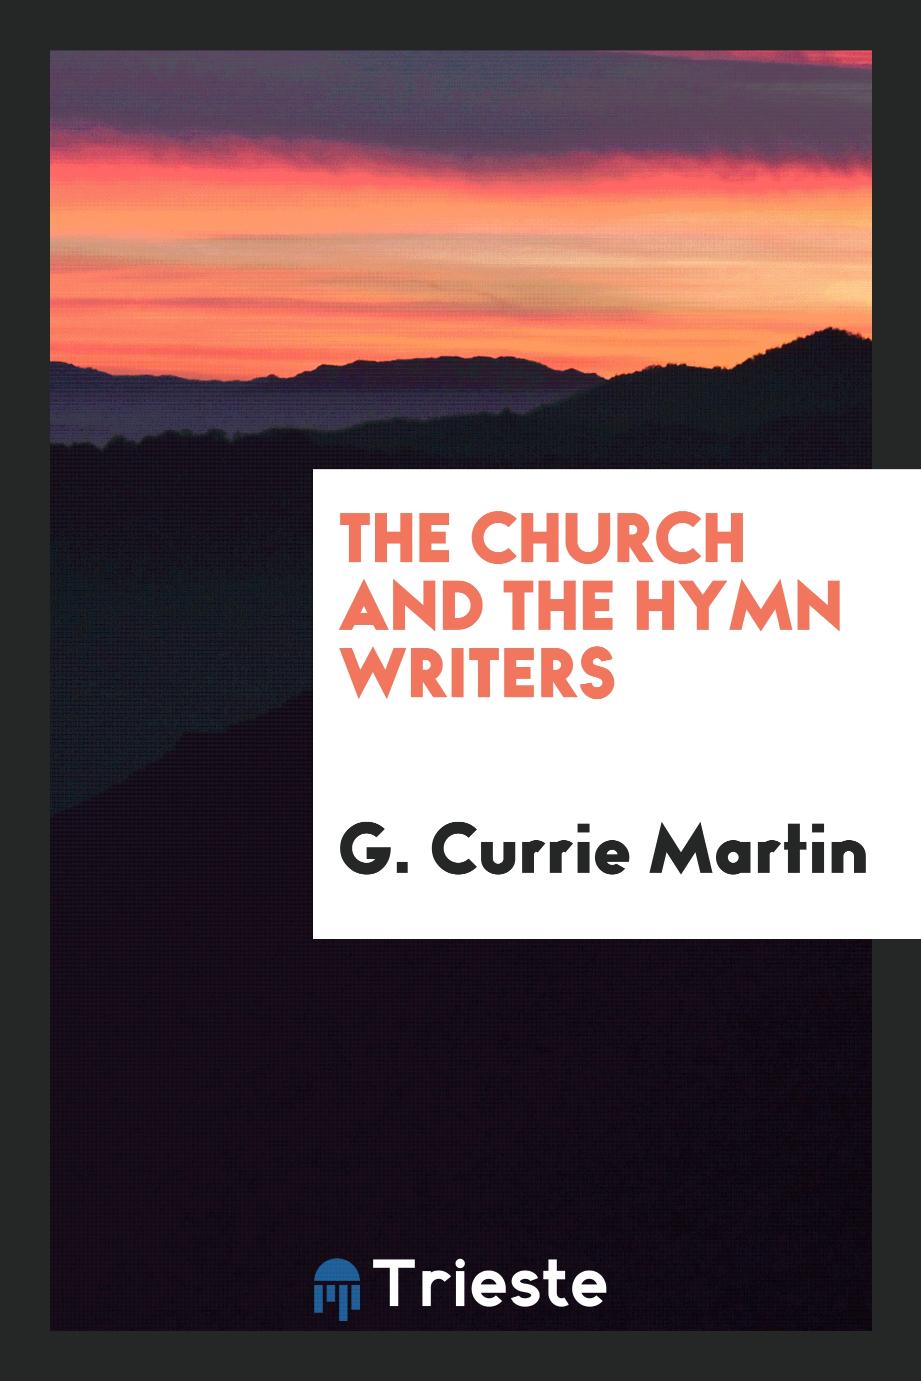 The church and the hymn writers